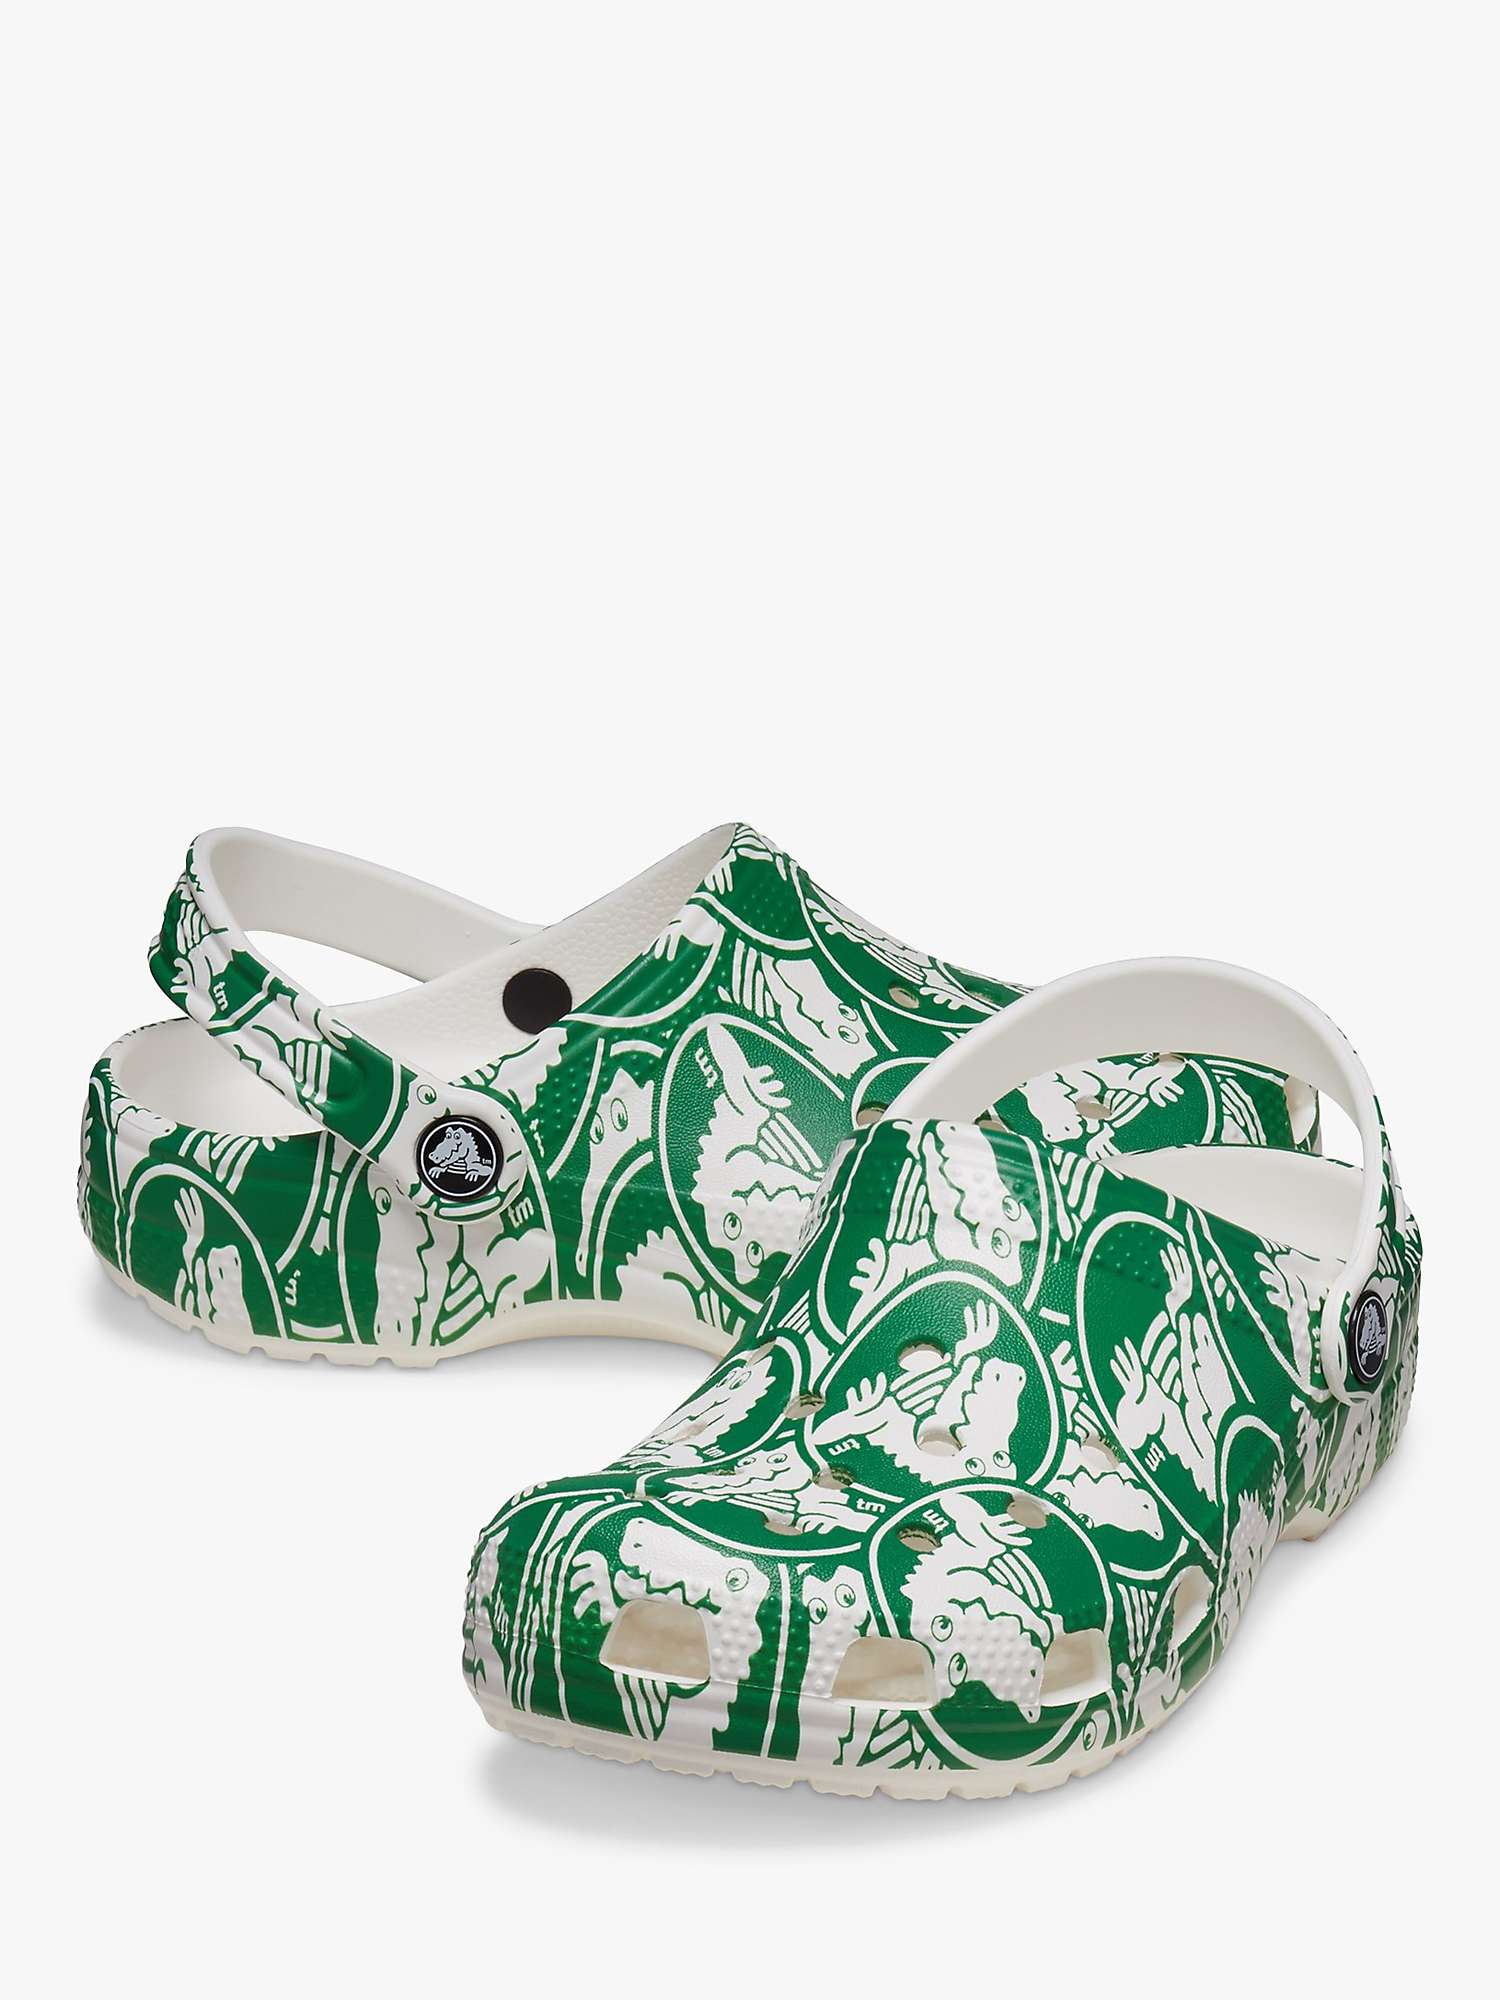 Buy Crocs Kids' Classic Graphic Clogs, Green/White Online at johnlewis.com